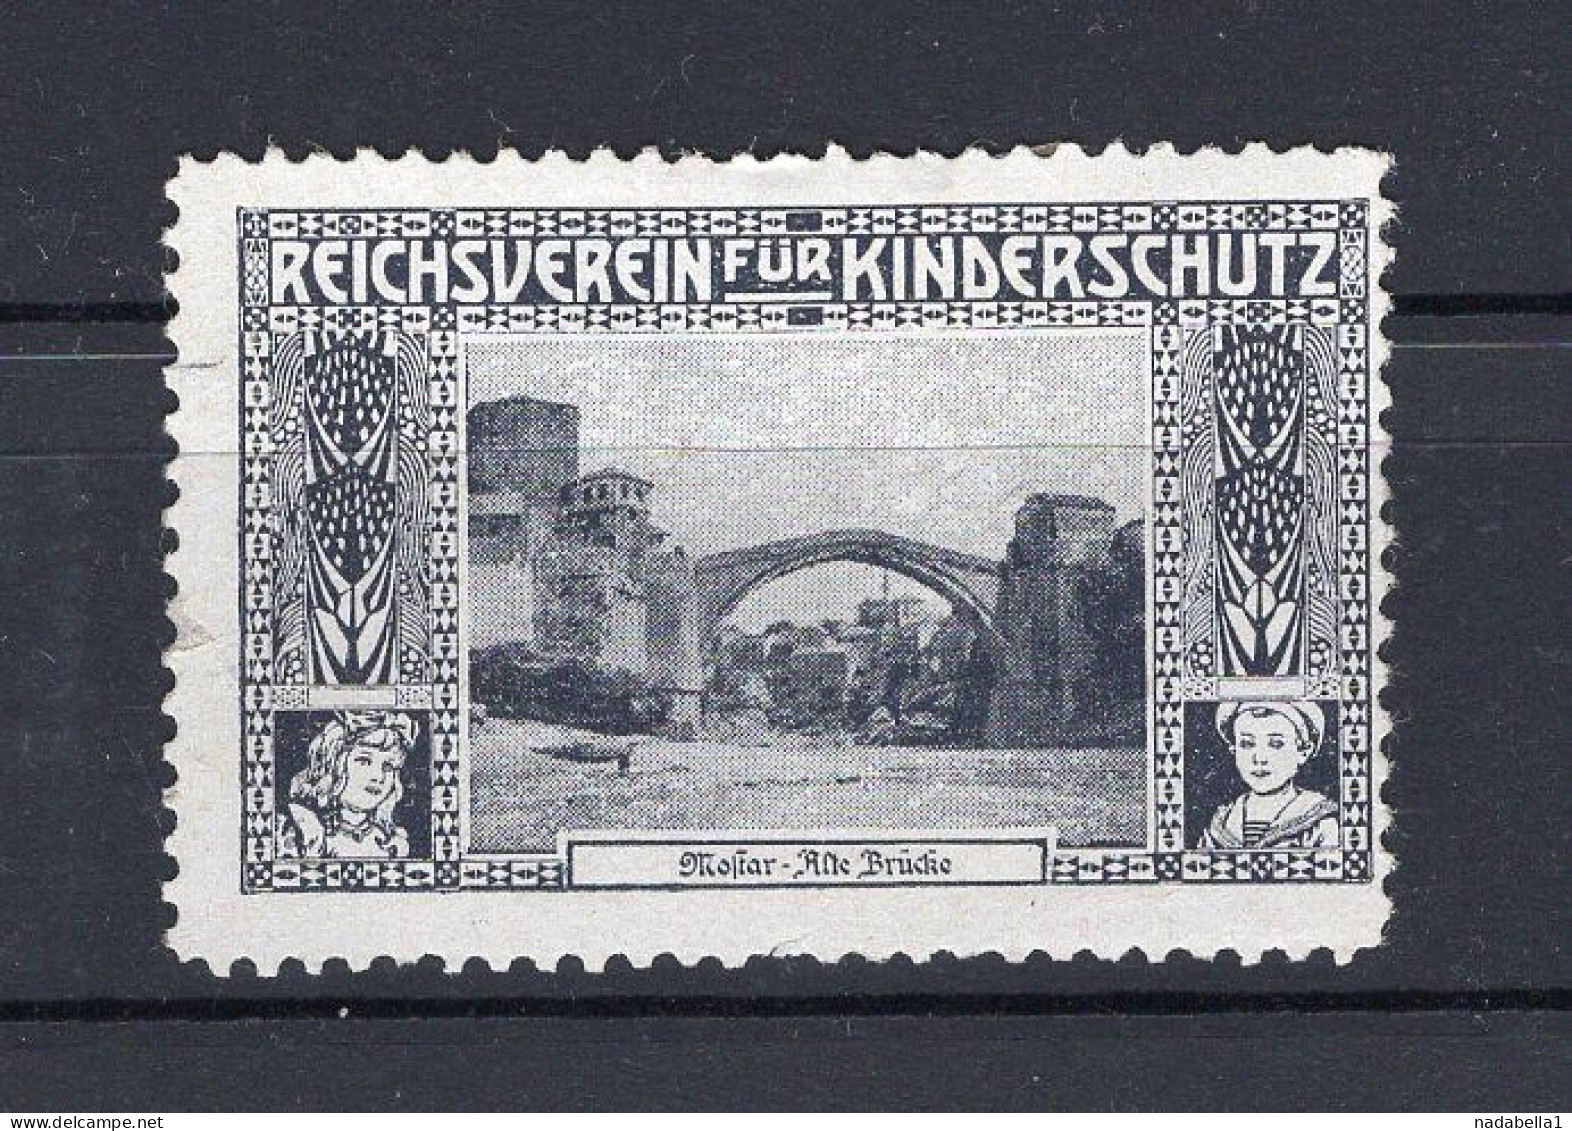 1900? AUSTRIA,HUNGARY EMPIRE,BOSNIA,REICH ASSOCIATION FOR CHILD PROTECTION ADDITIONAL STAMP,MOSTAR OLD BRIDGE - Ungebraucht